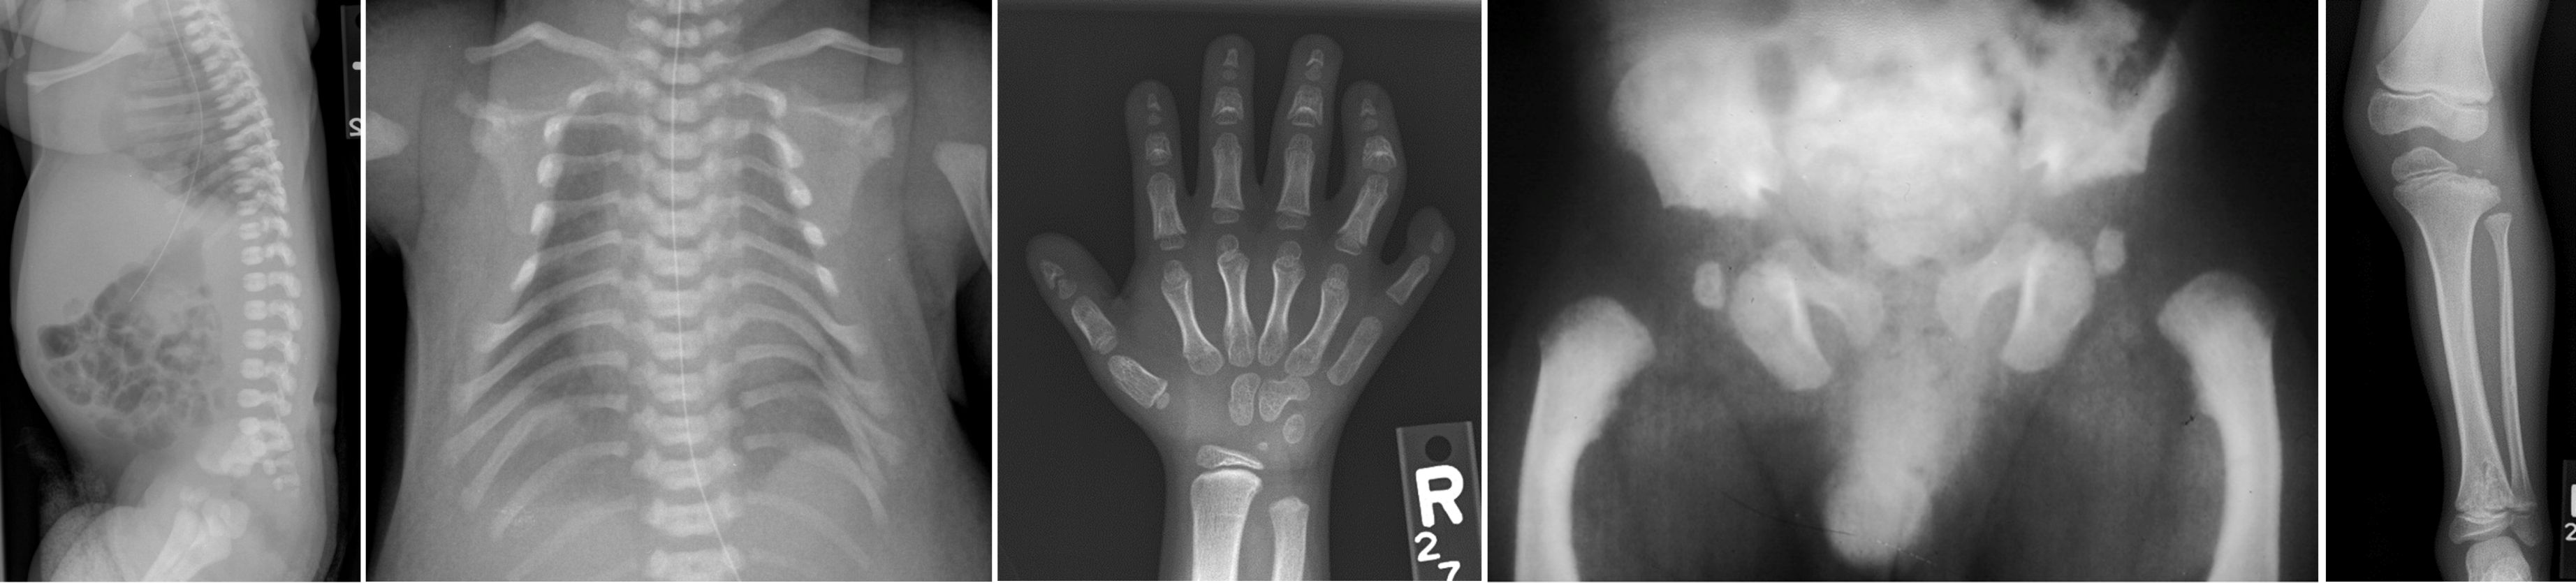 Figure 7. chondroectodermal dysplasia (or Ellis-van Creveld syndrome). short ribs, early ossification of femoral head, polydactyly cone-shaped epiphyses, no platyspondyly (helps differentiate from thanatophoric dysplasia), flatening of lateral aspect of proximal tibial epiphysis.